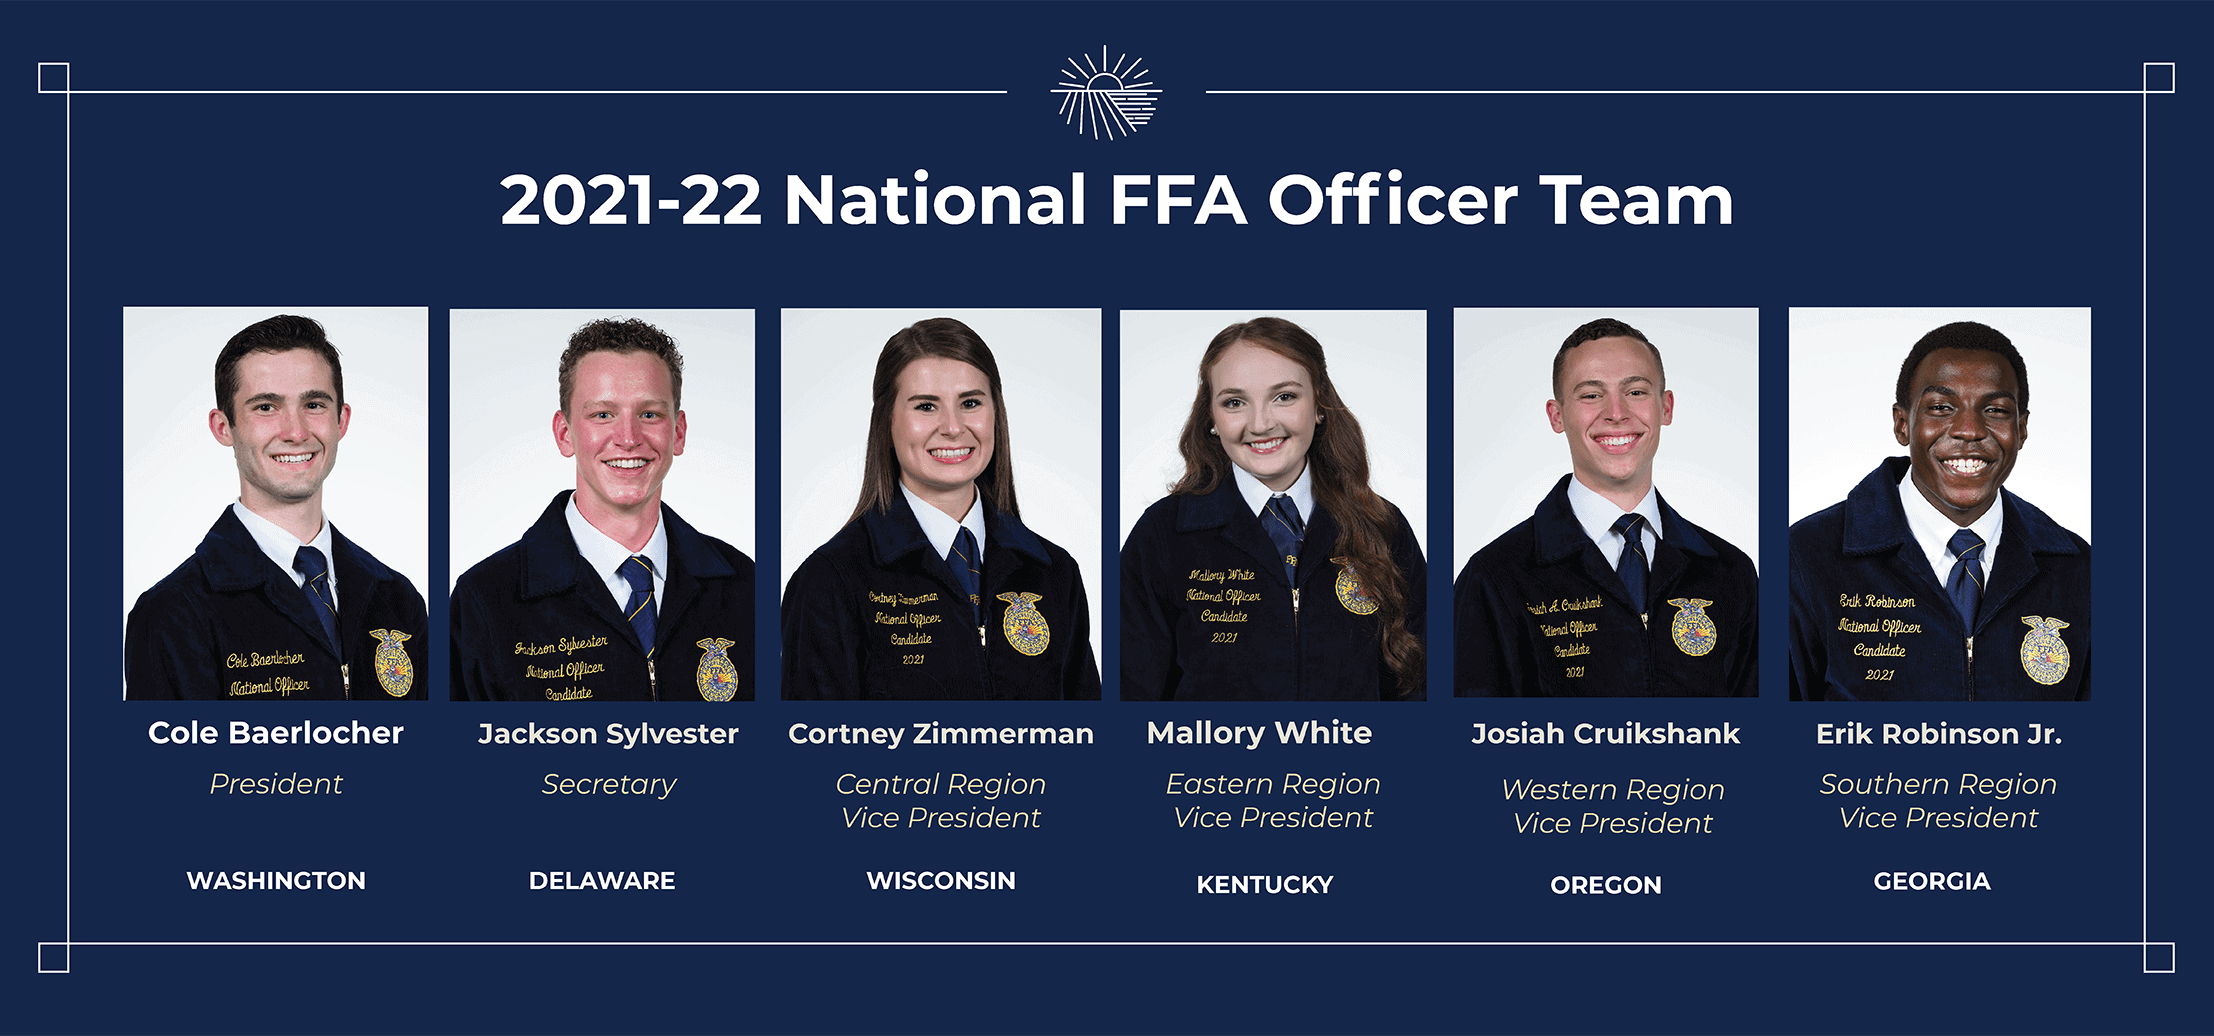 Get to Know the 2021-22 National Officers - National FFA Organization